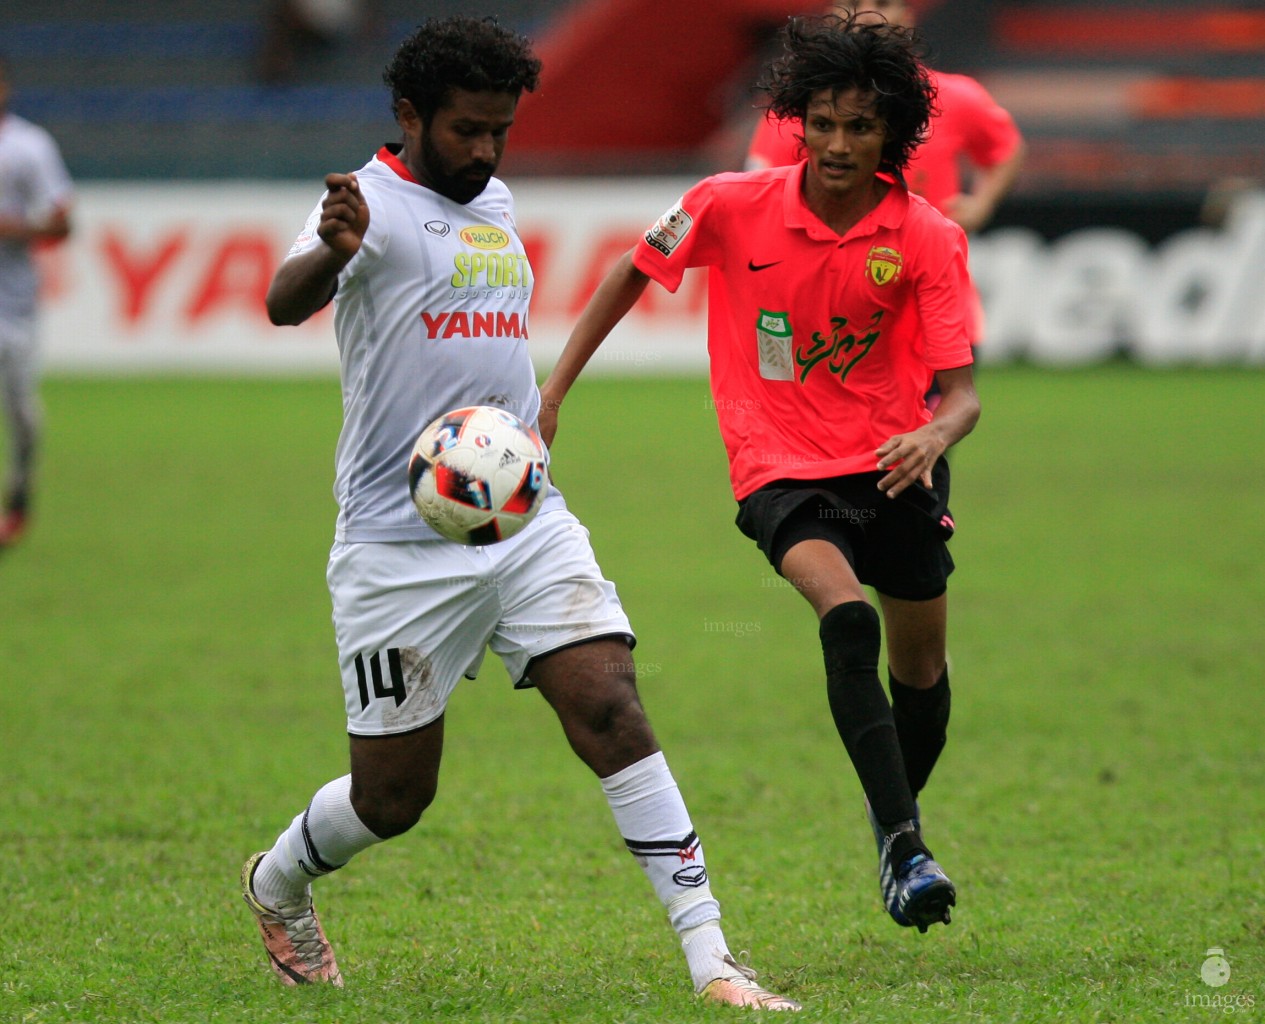 United Victory vs TC Sports Club in the second round of Ooredoo Dhivehi Premiere League. 2016 Male', Monday 22 August 2016. (Images.mv Photo: Abdulla Abeedh)